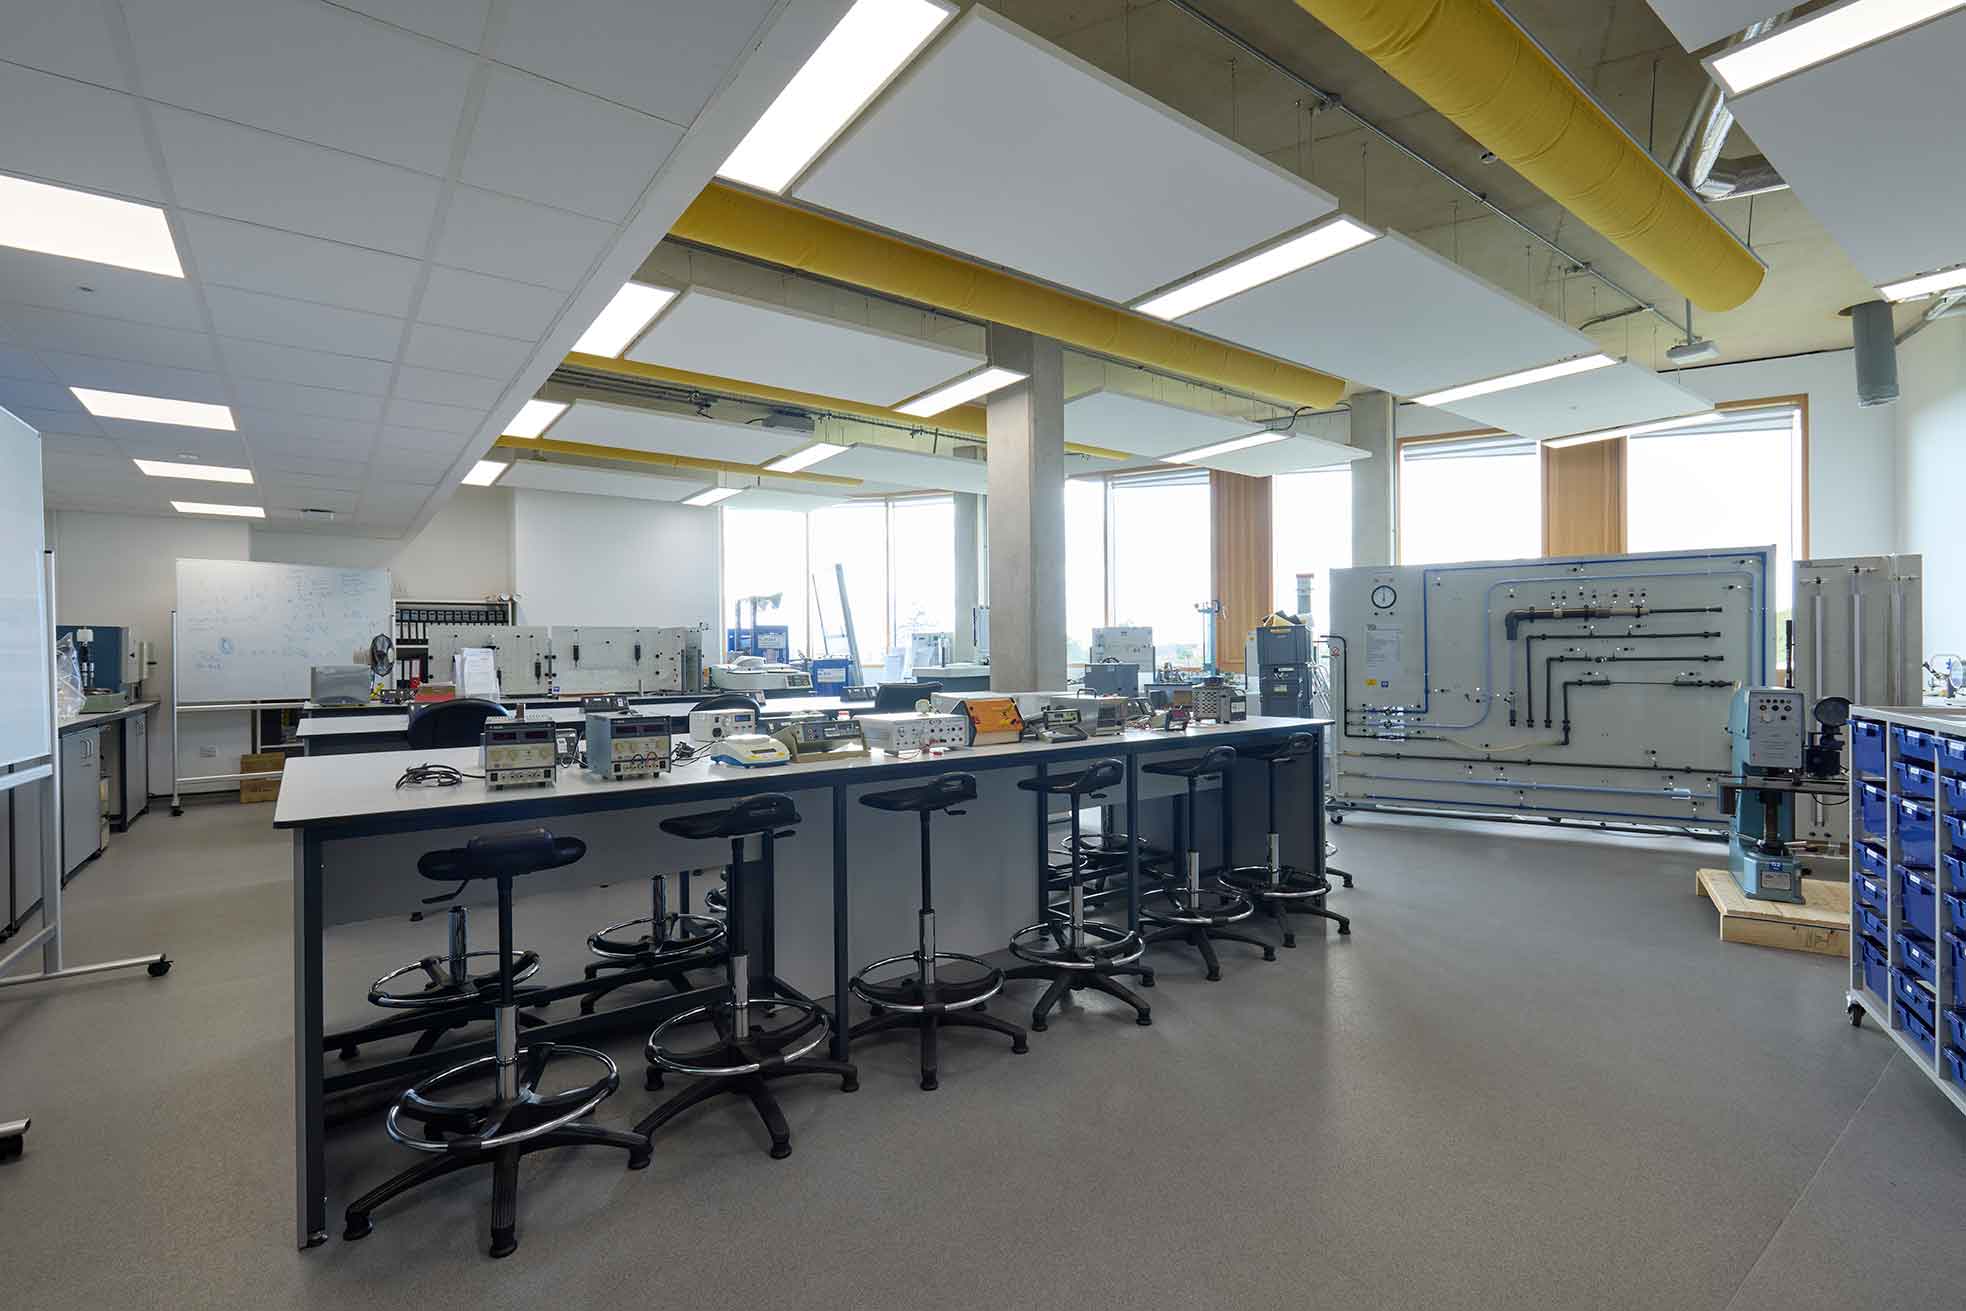 A photograph of the Engineering Laboratory at the University of Northampton - there is a laboratory workbench in the foreground, and floor-to-ceiling windows in the background